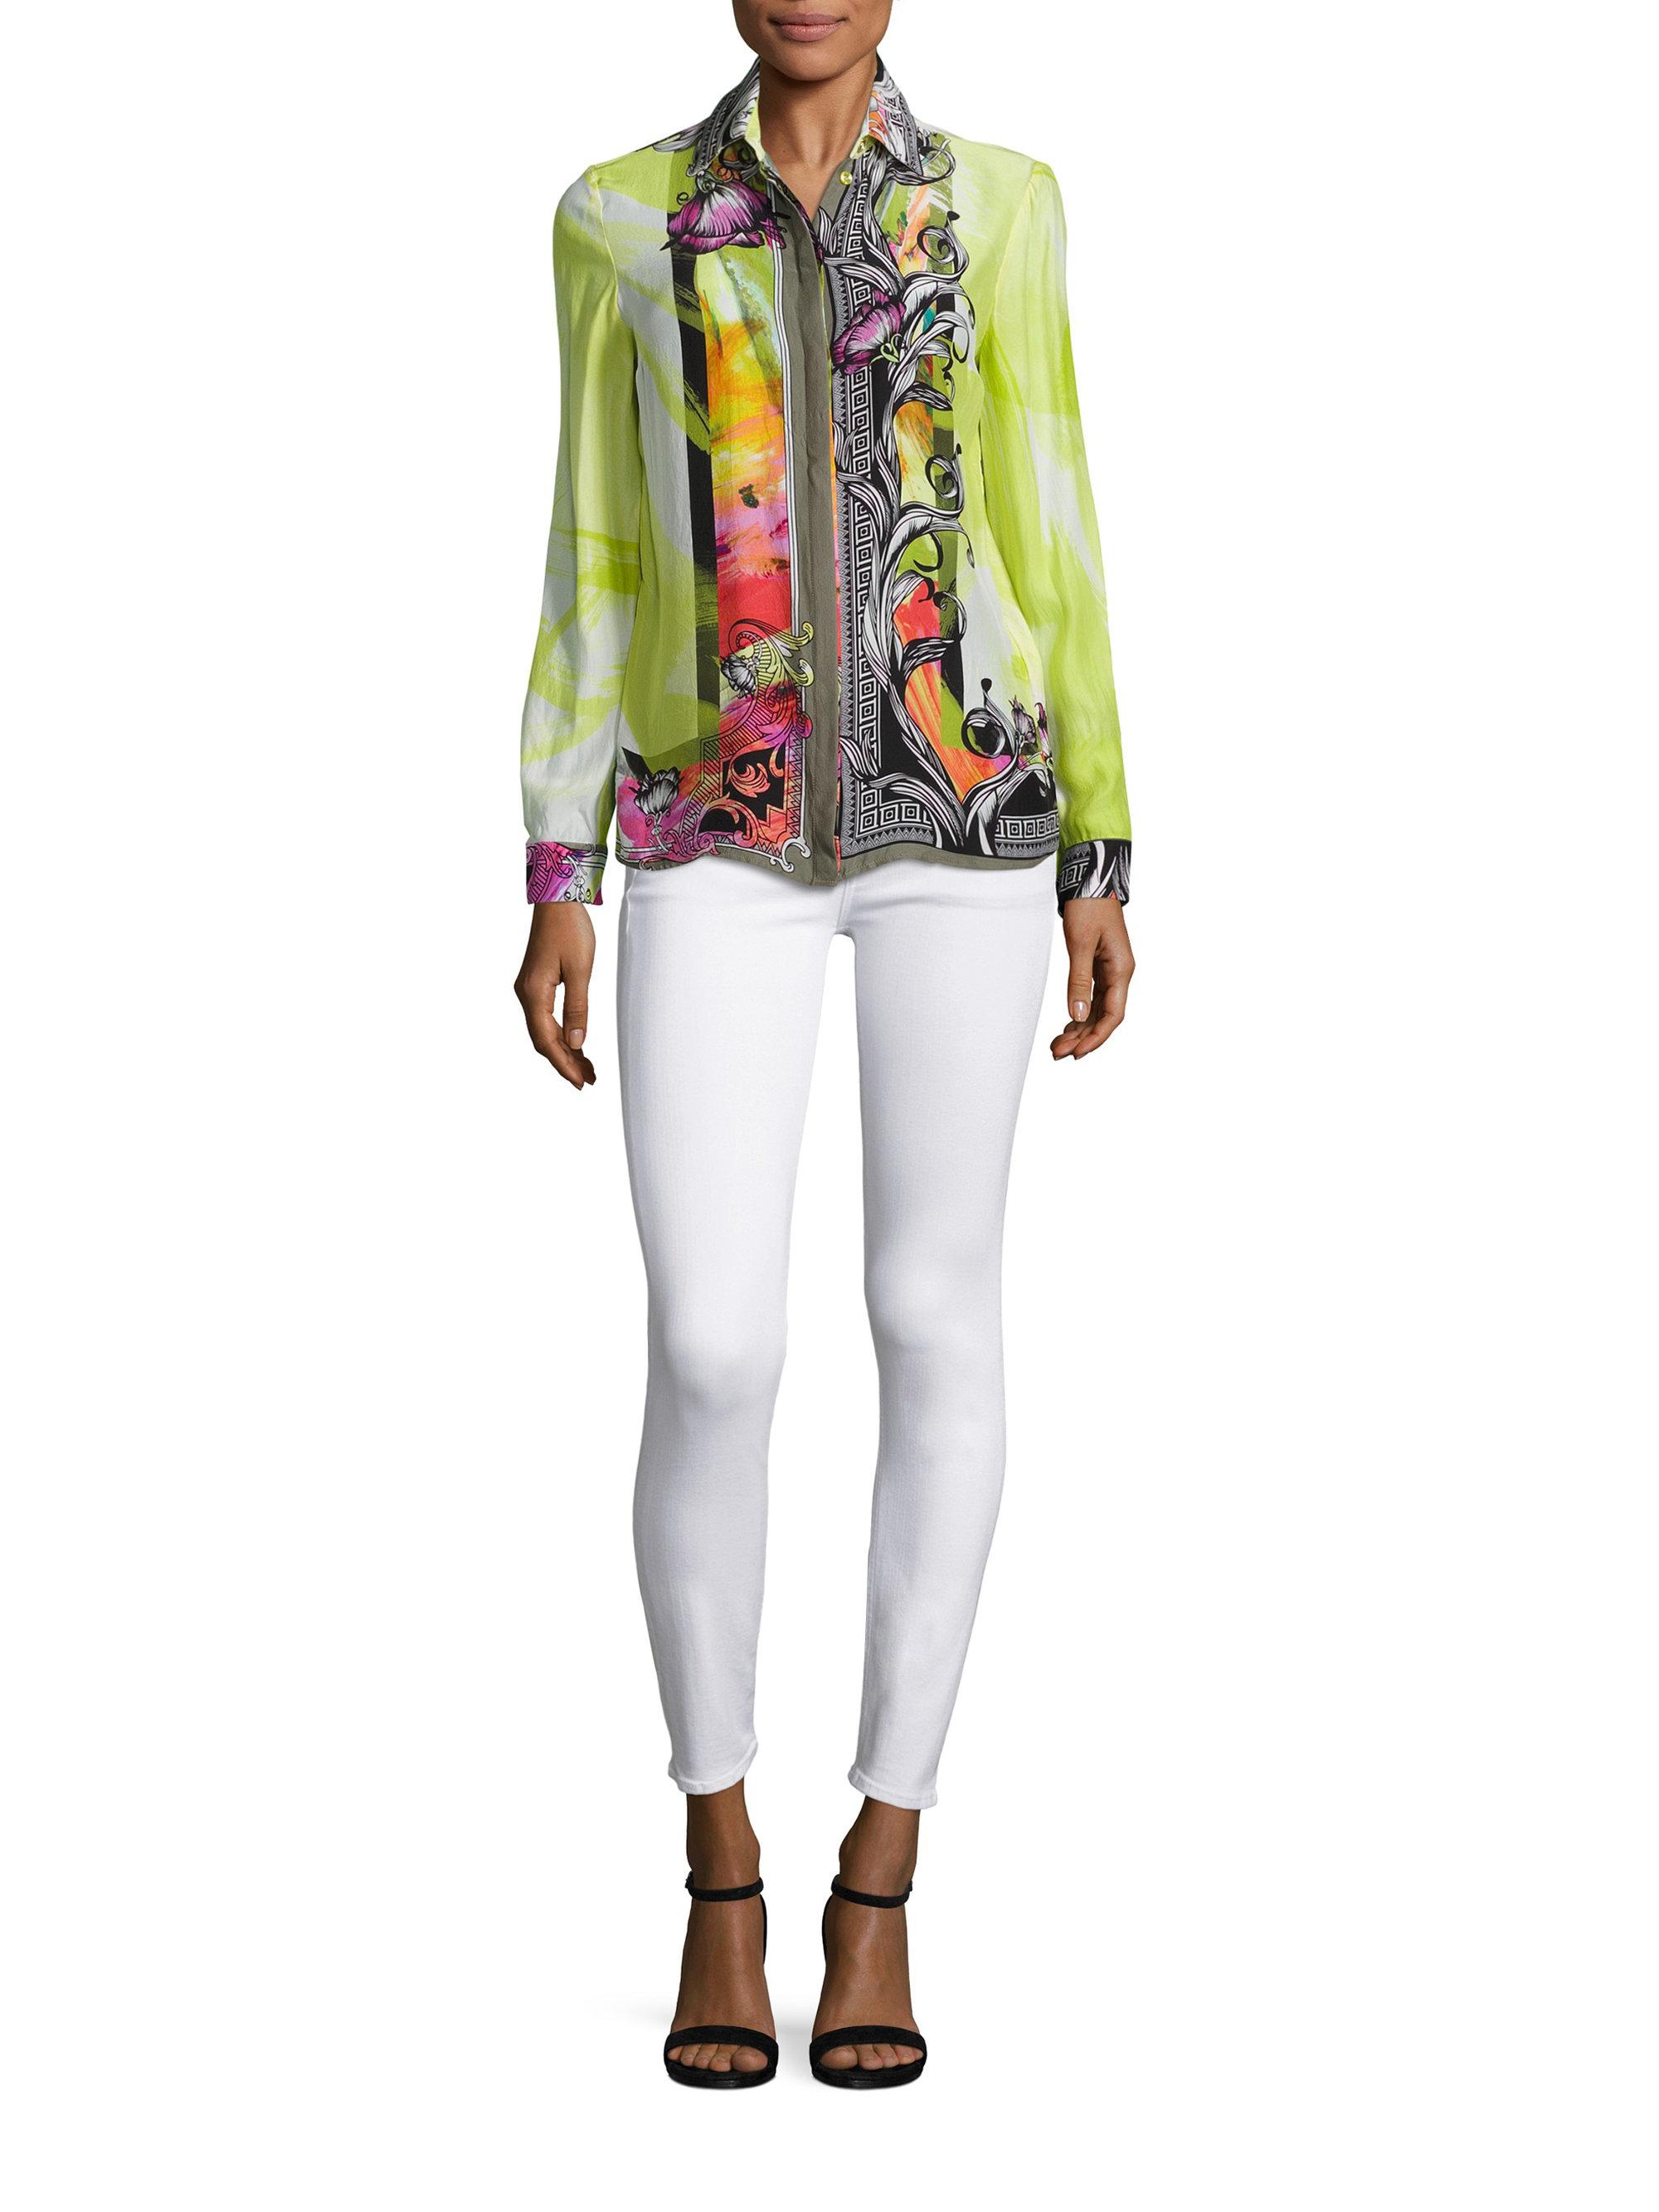 Versace Floral Silk Blouse in Green - Lyst